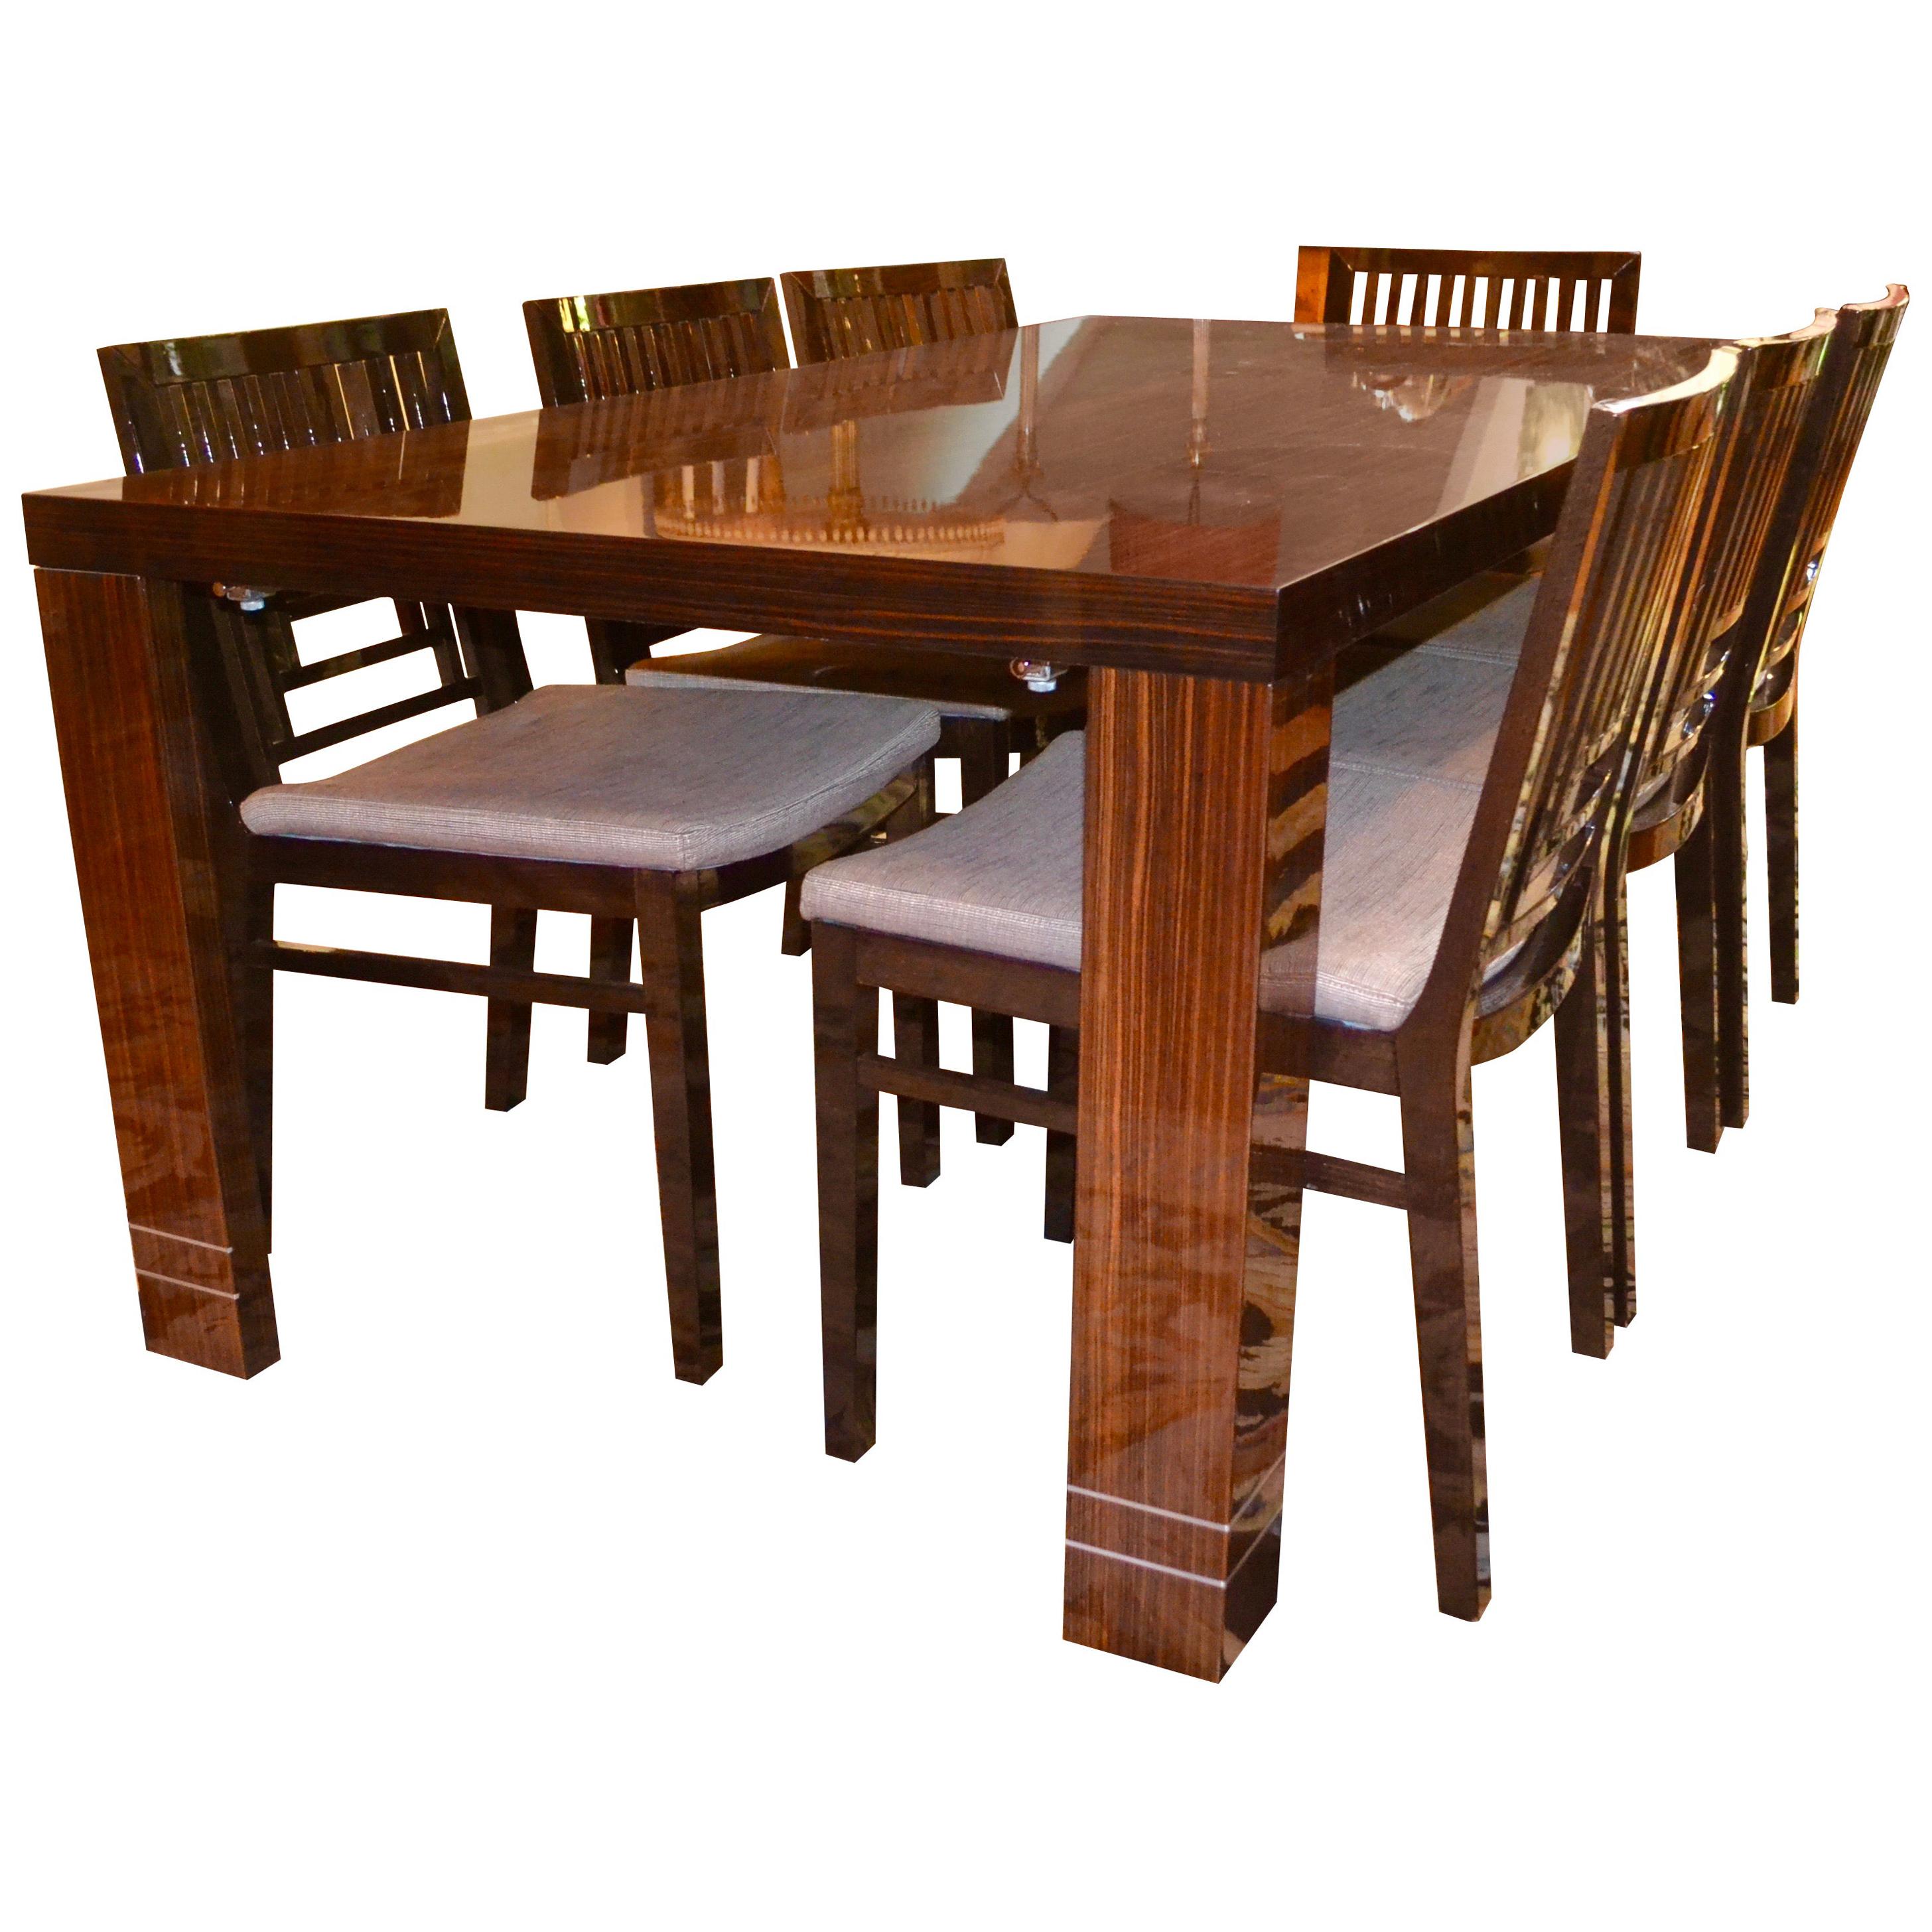 Art Deco Style Macassar Ebony Dining Table and Chairs